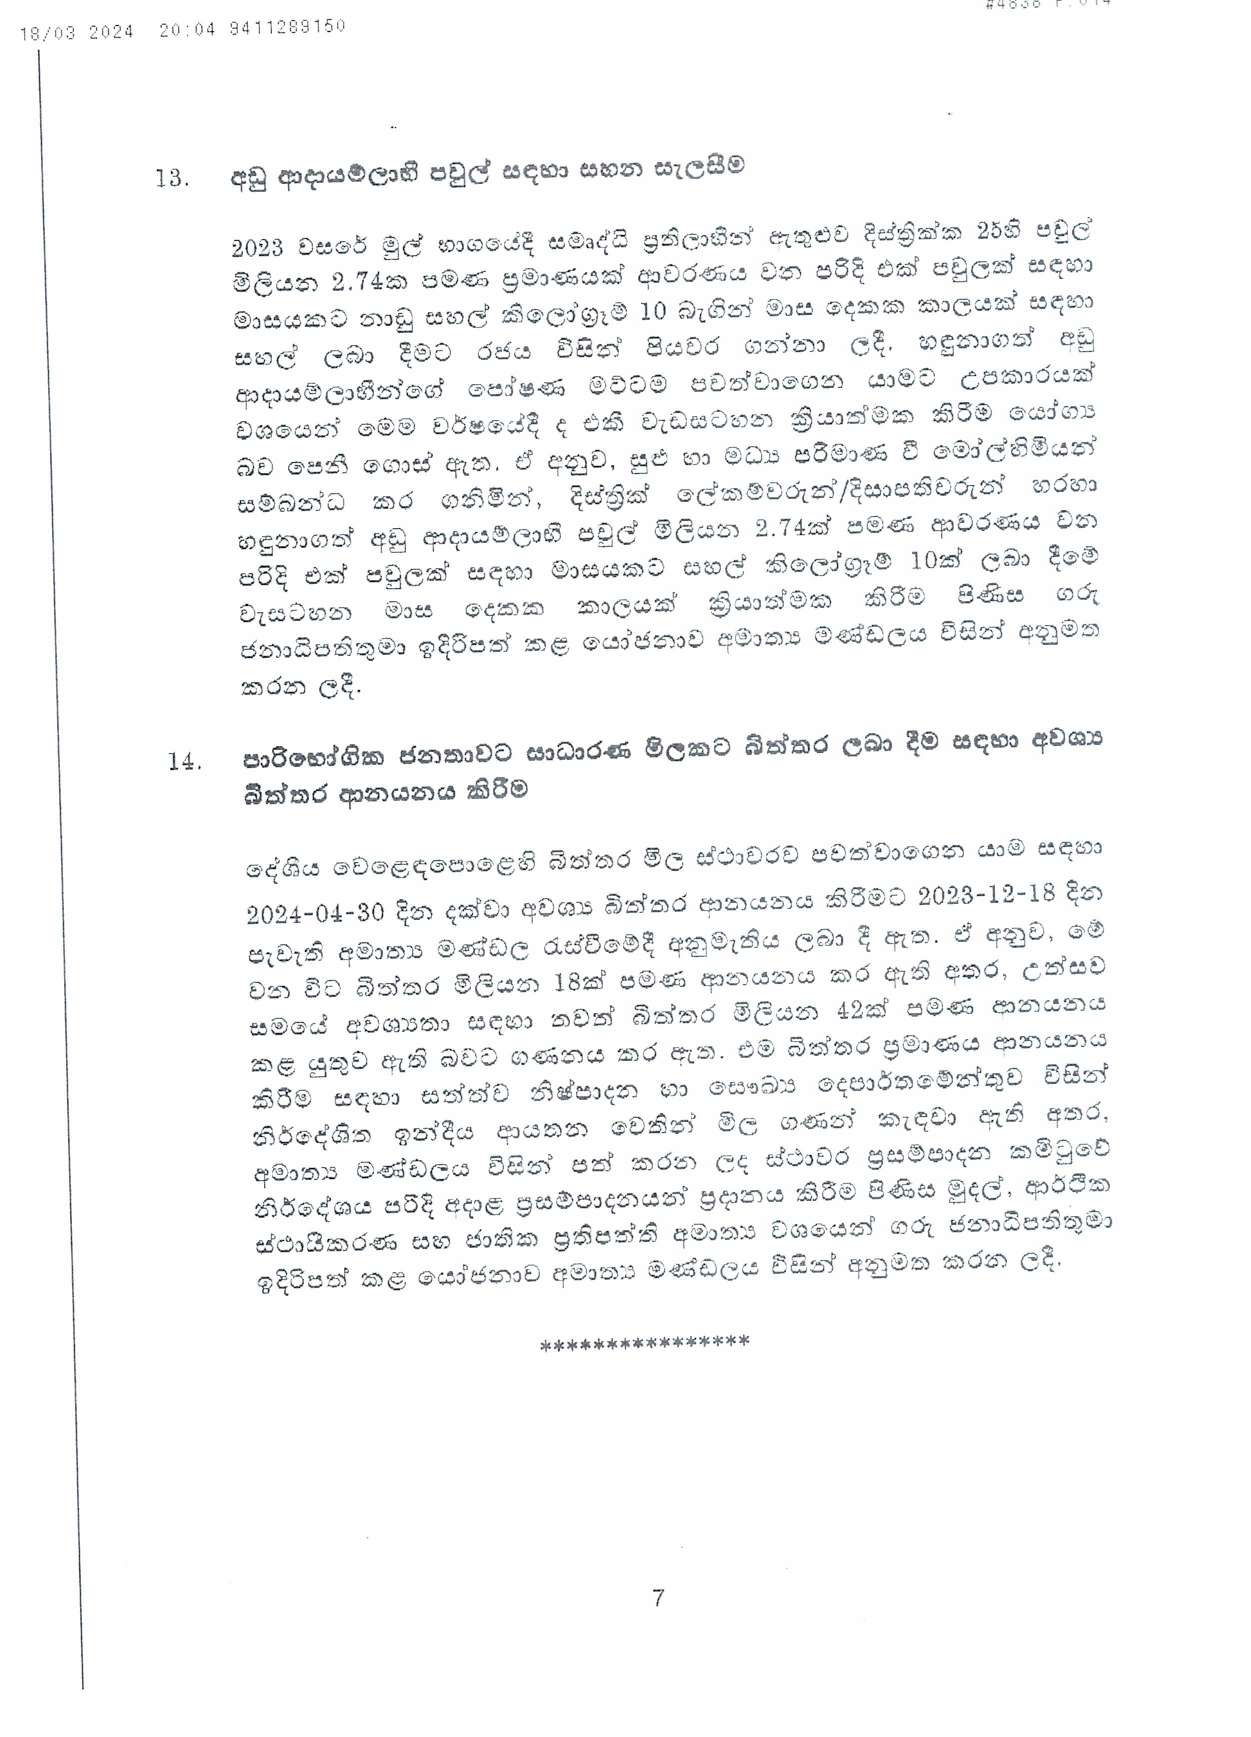 Cabinet Decisions on 18.03.2024 compressed page 0007